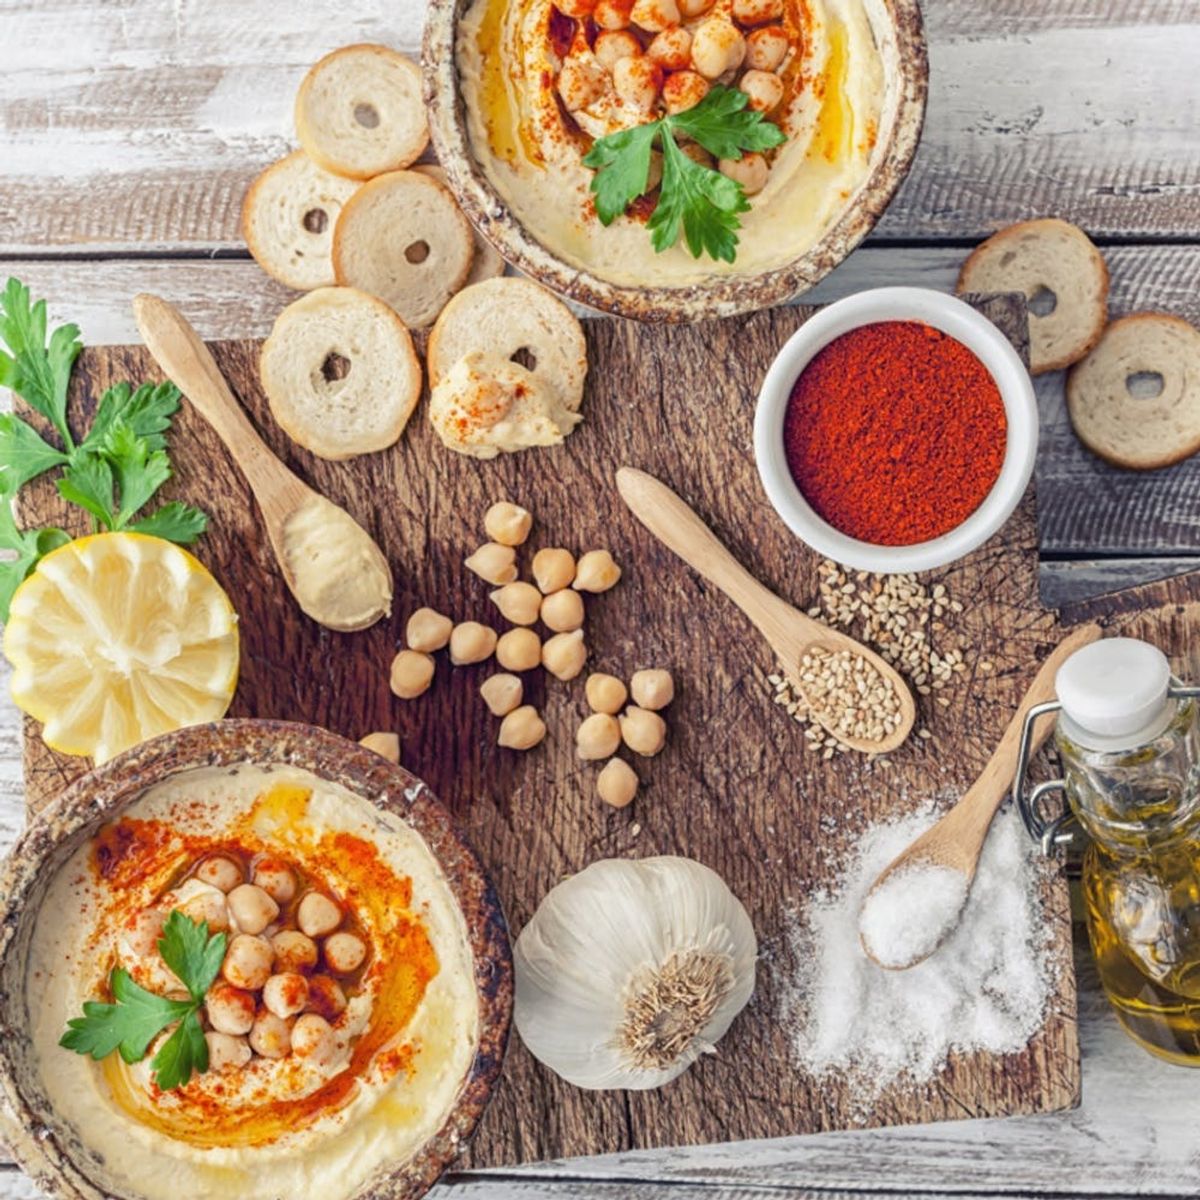 Here’s Why the Mediterranean Diet Is So Good for Your Heart